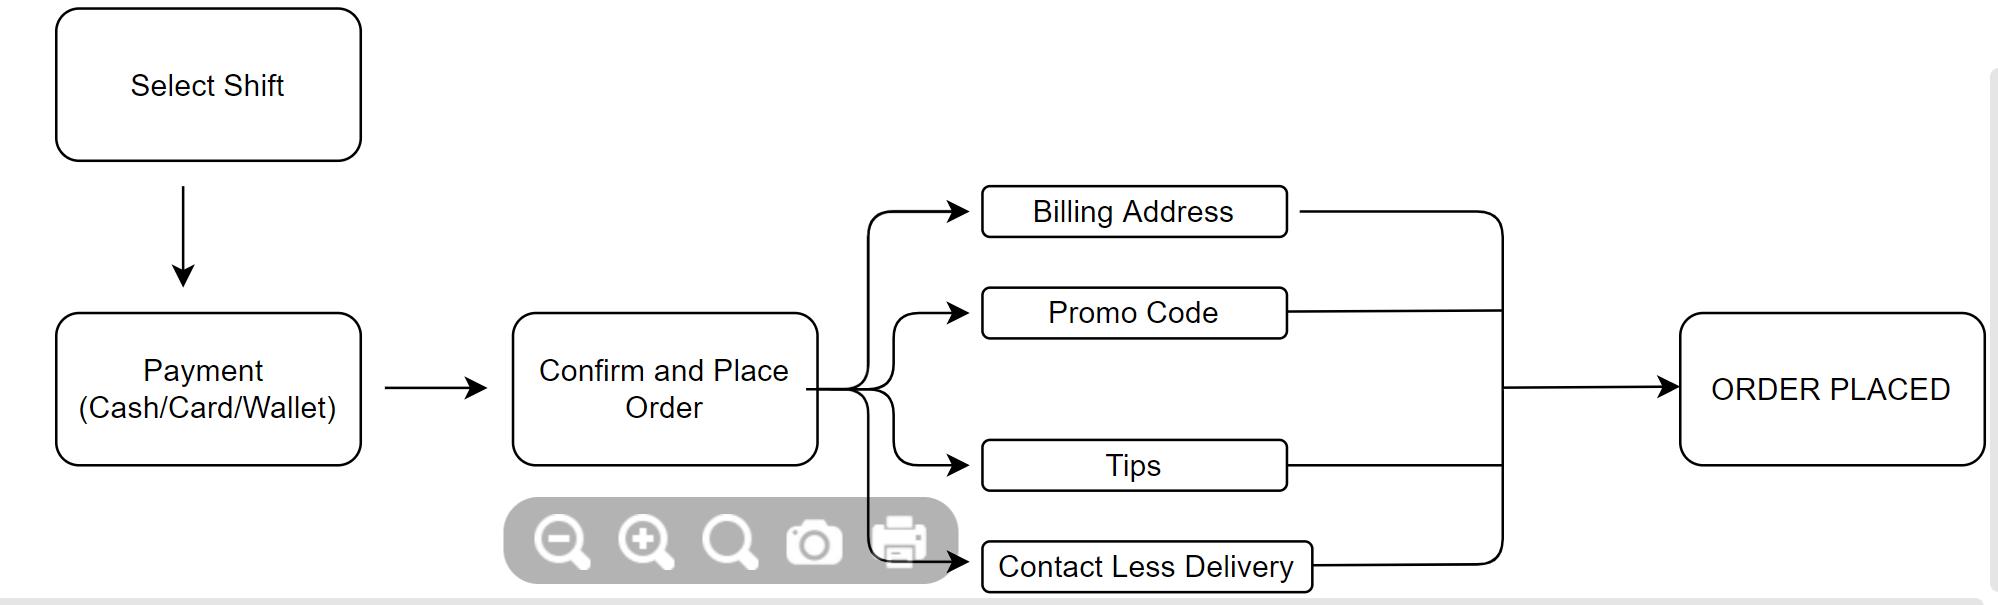 customer flow of the delivery app part 3 - Workflow of a delivery app